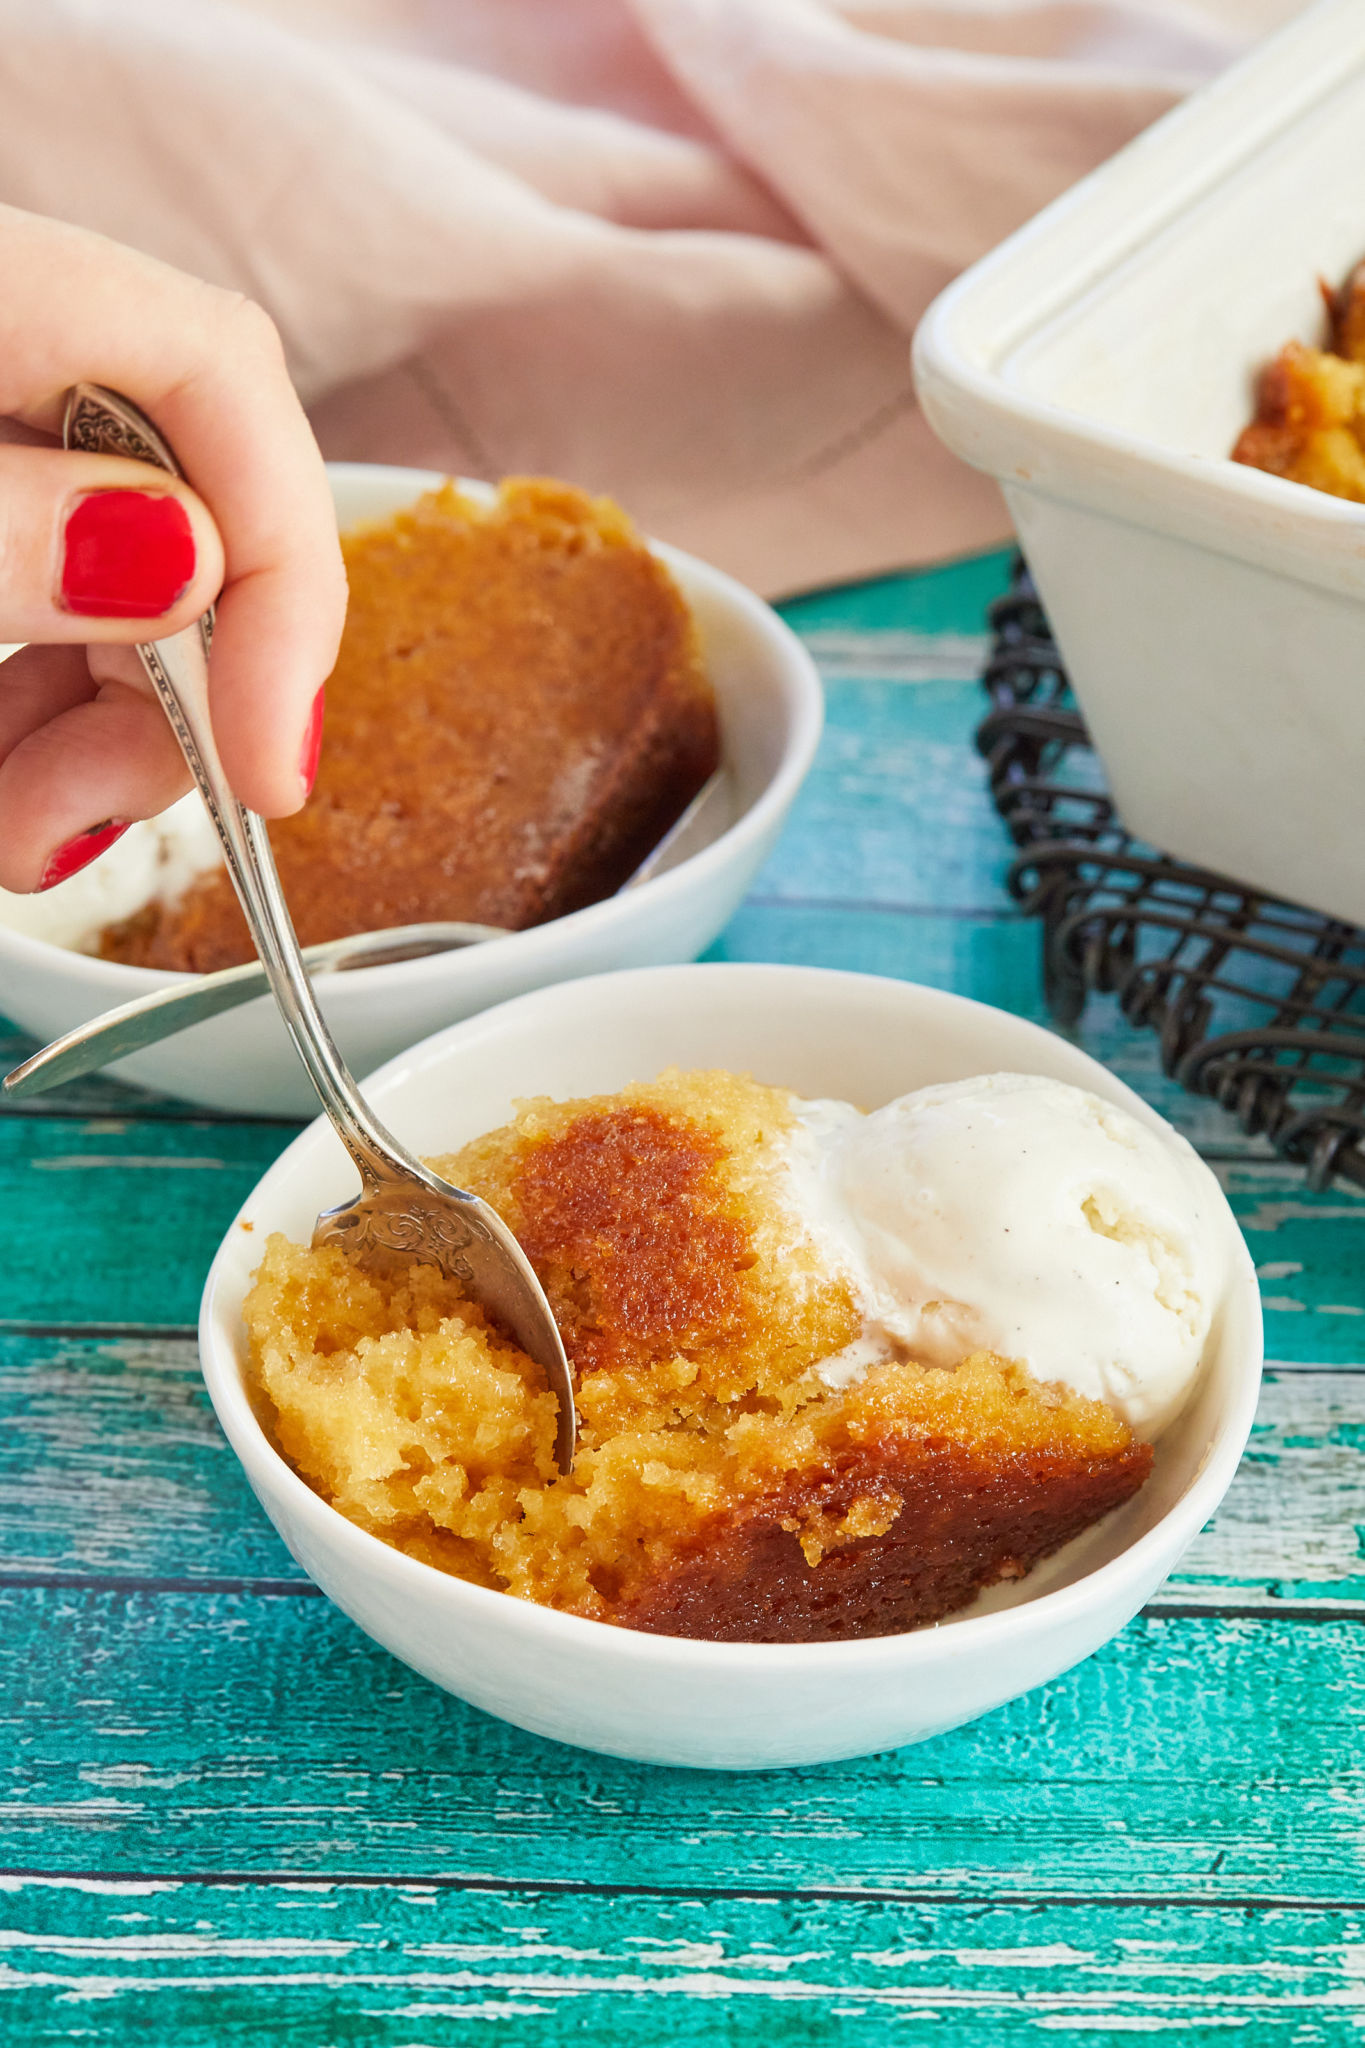 A spoonful of Malva Cake, a pudding recipe from South Africa, topped with vanilla ice cream.